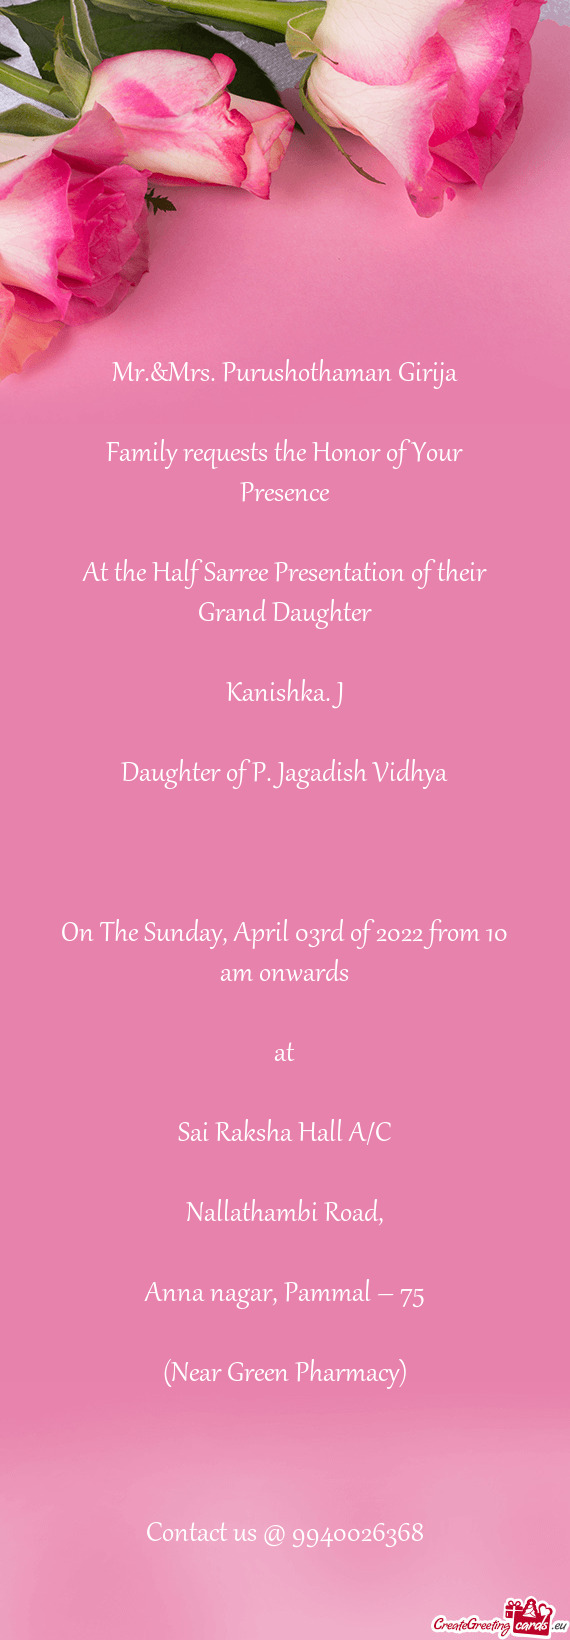 On The Sunday, April 03rd of 2022 from 10 am onwards